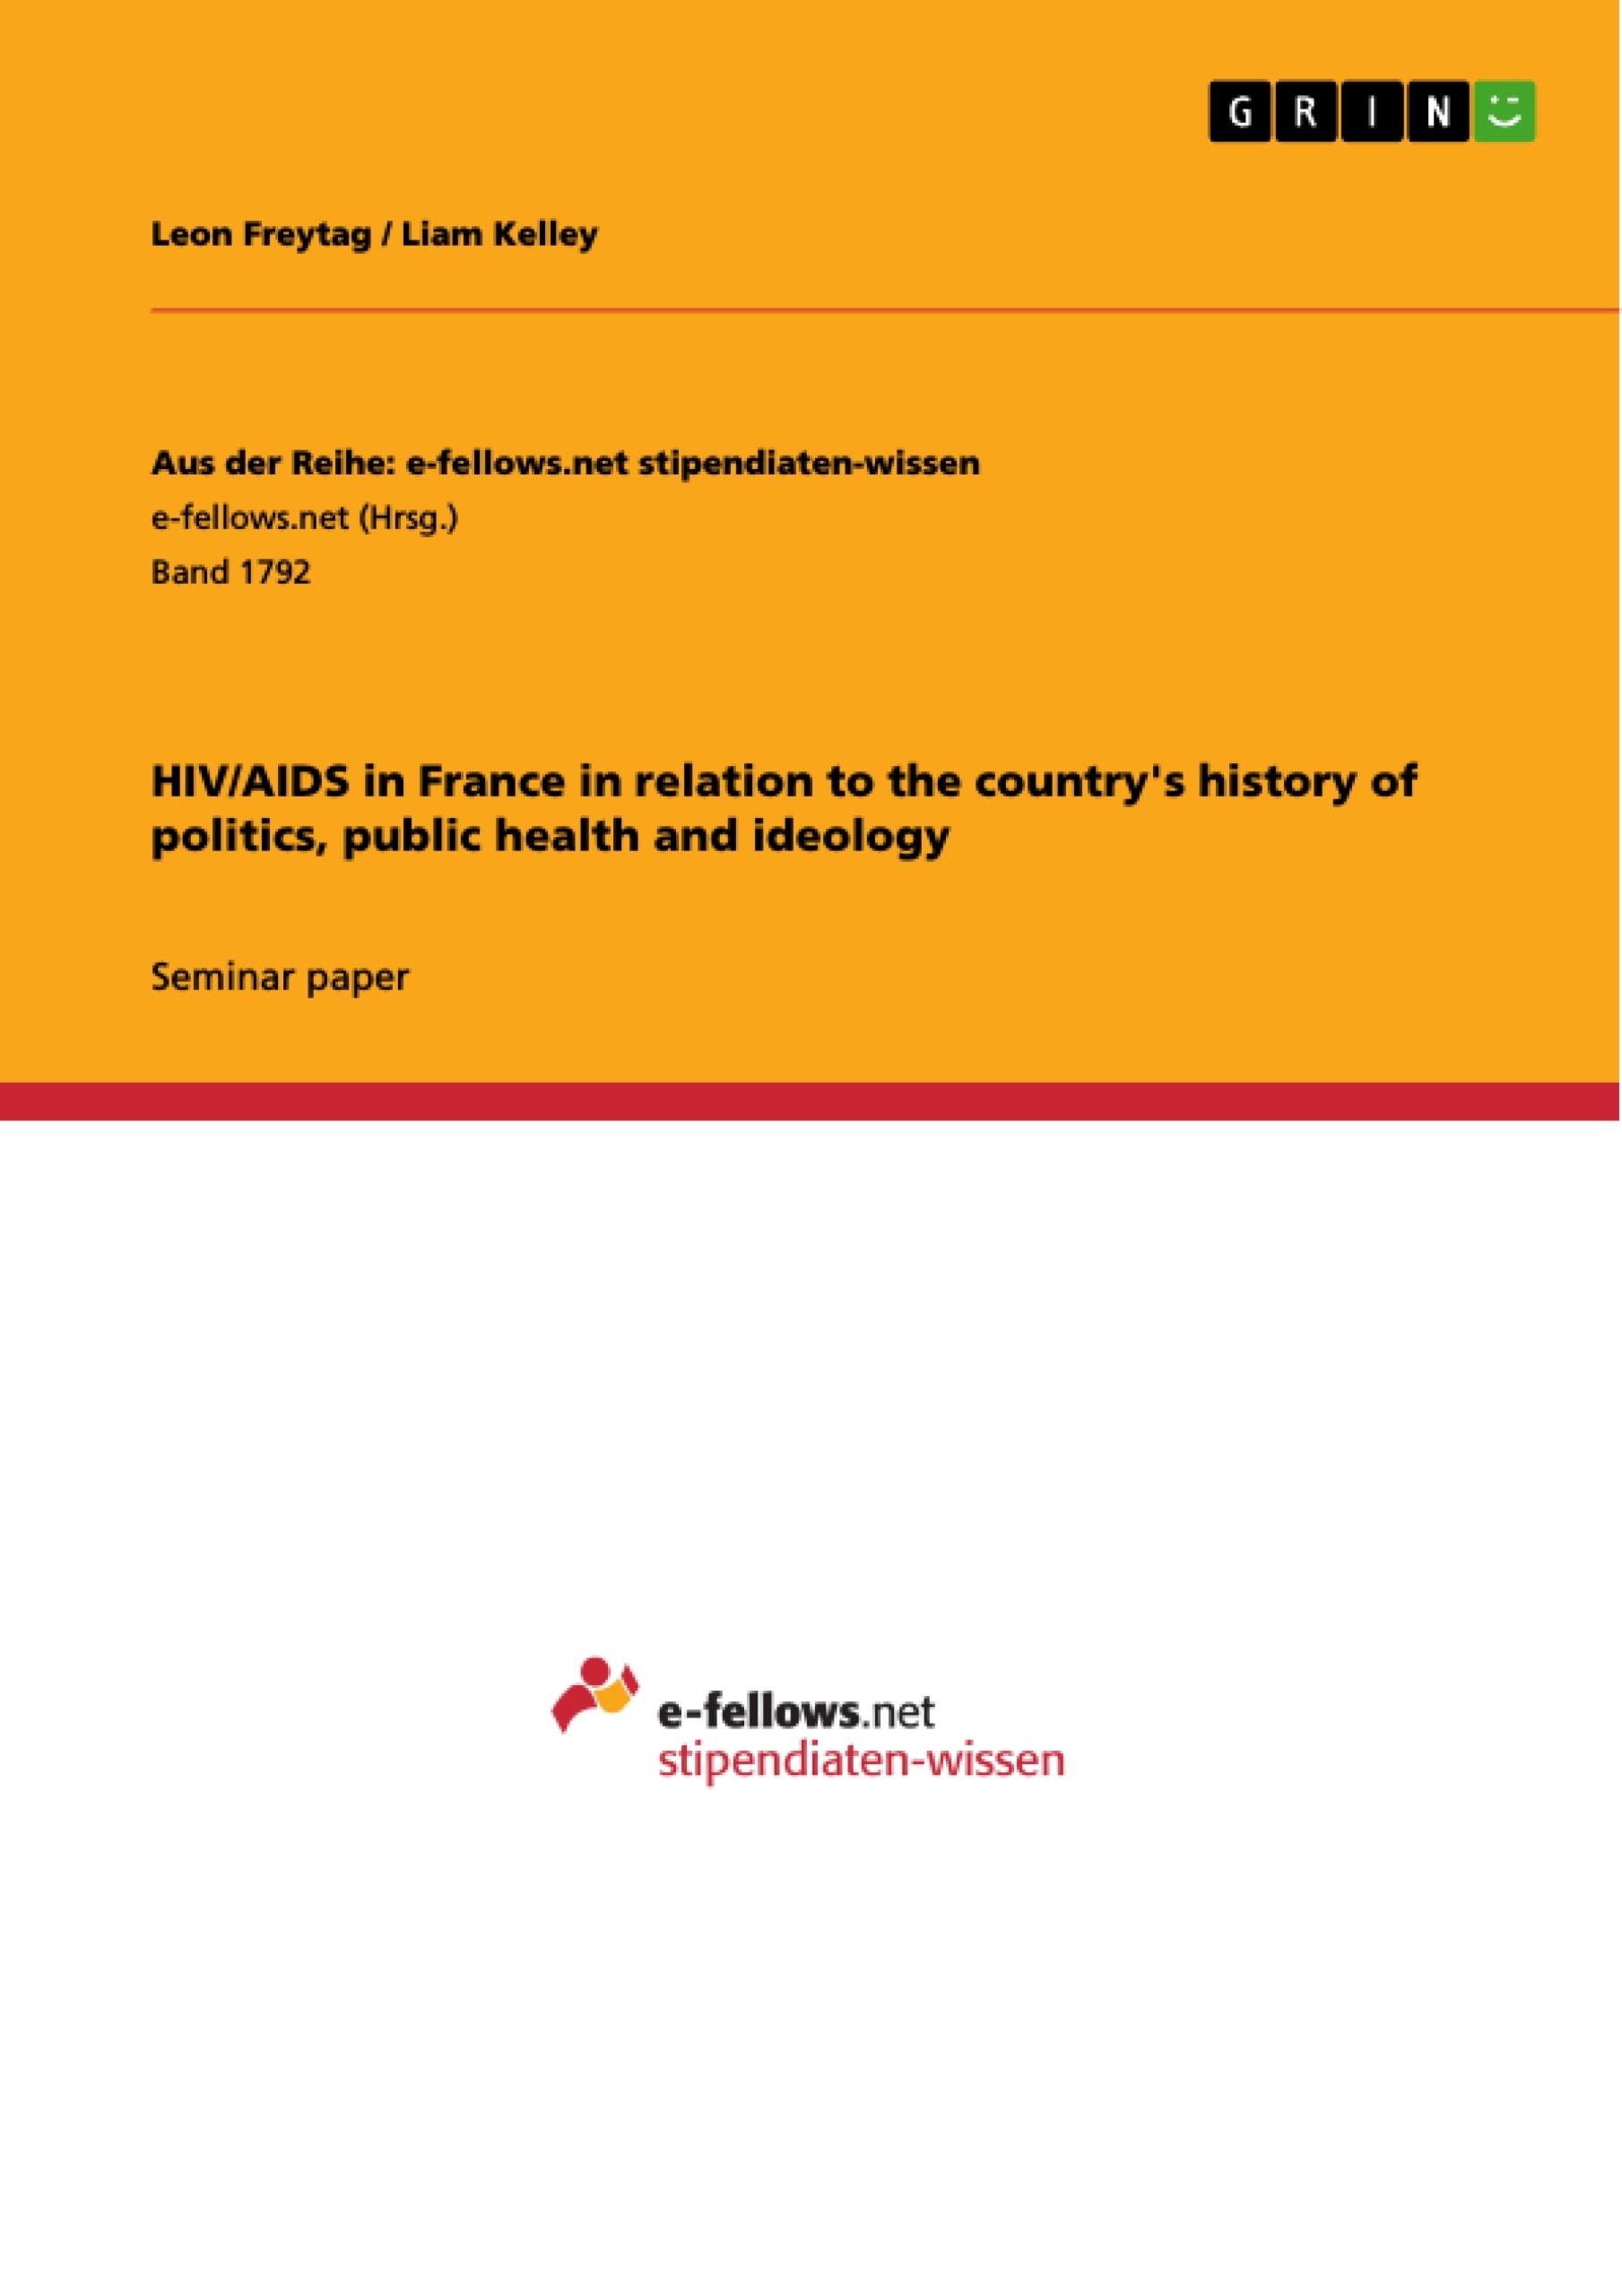 Title: HIV/AIDS in France in relation to the country's history of politics, public health and ideology